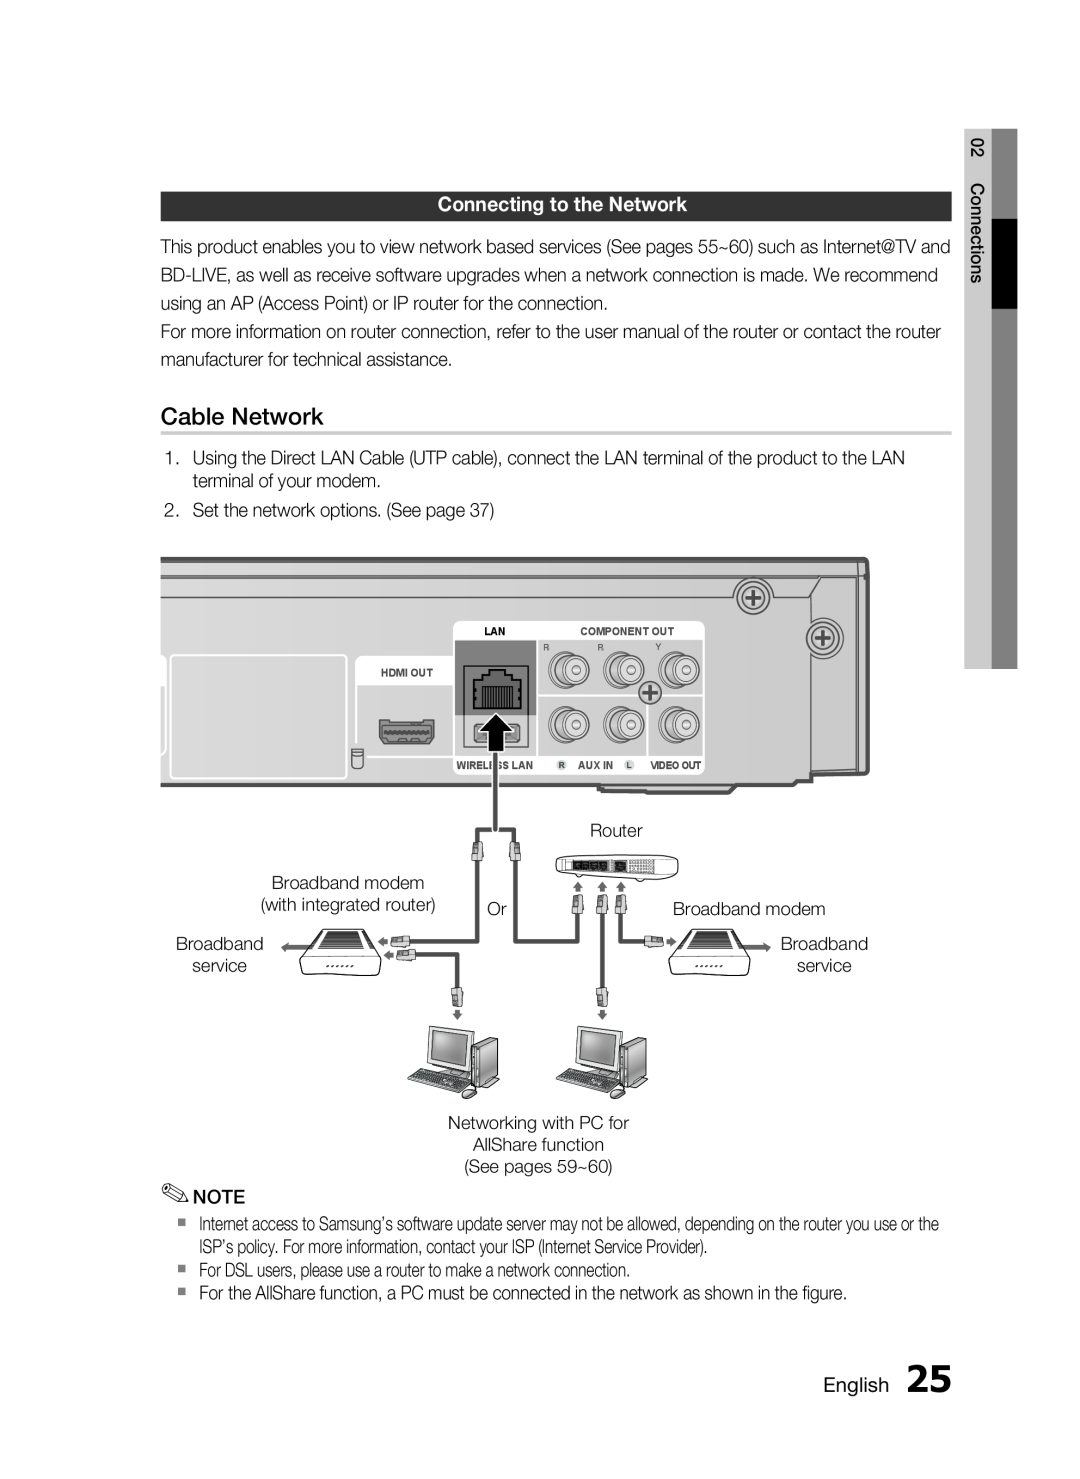 Samsung AH68-02258S, HT-C5500 user manual Cable Network, Connecting to the Network, English 